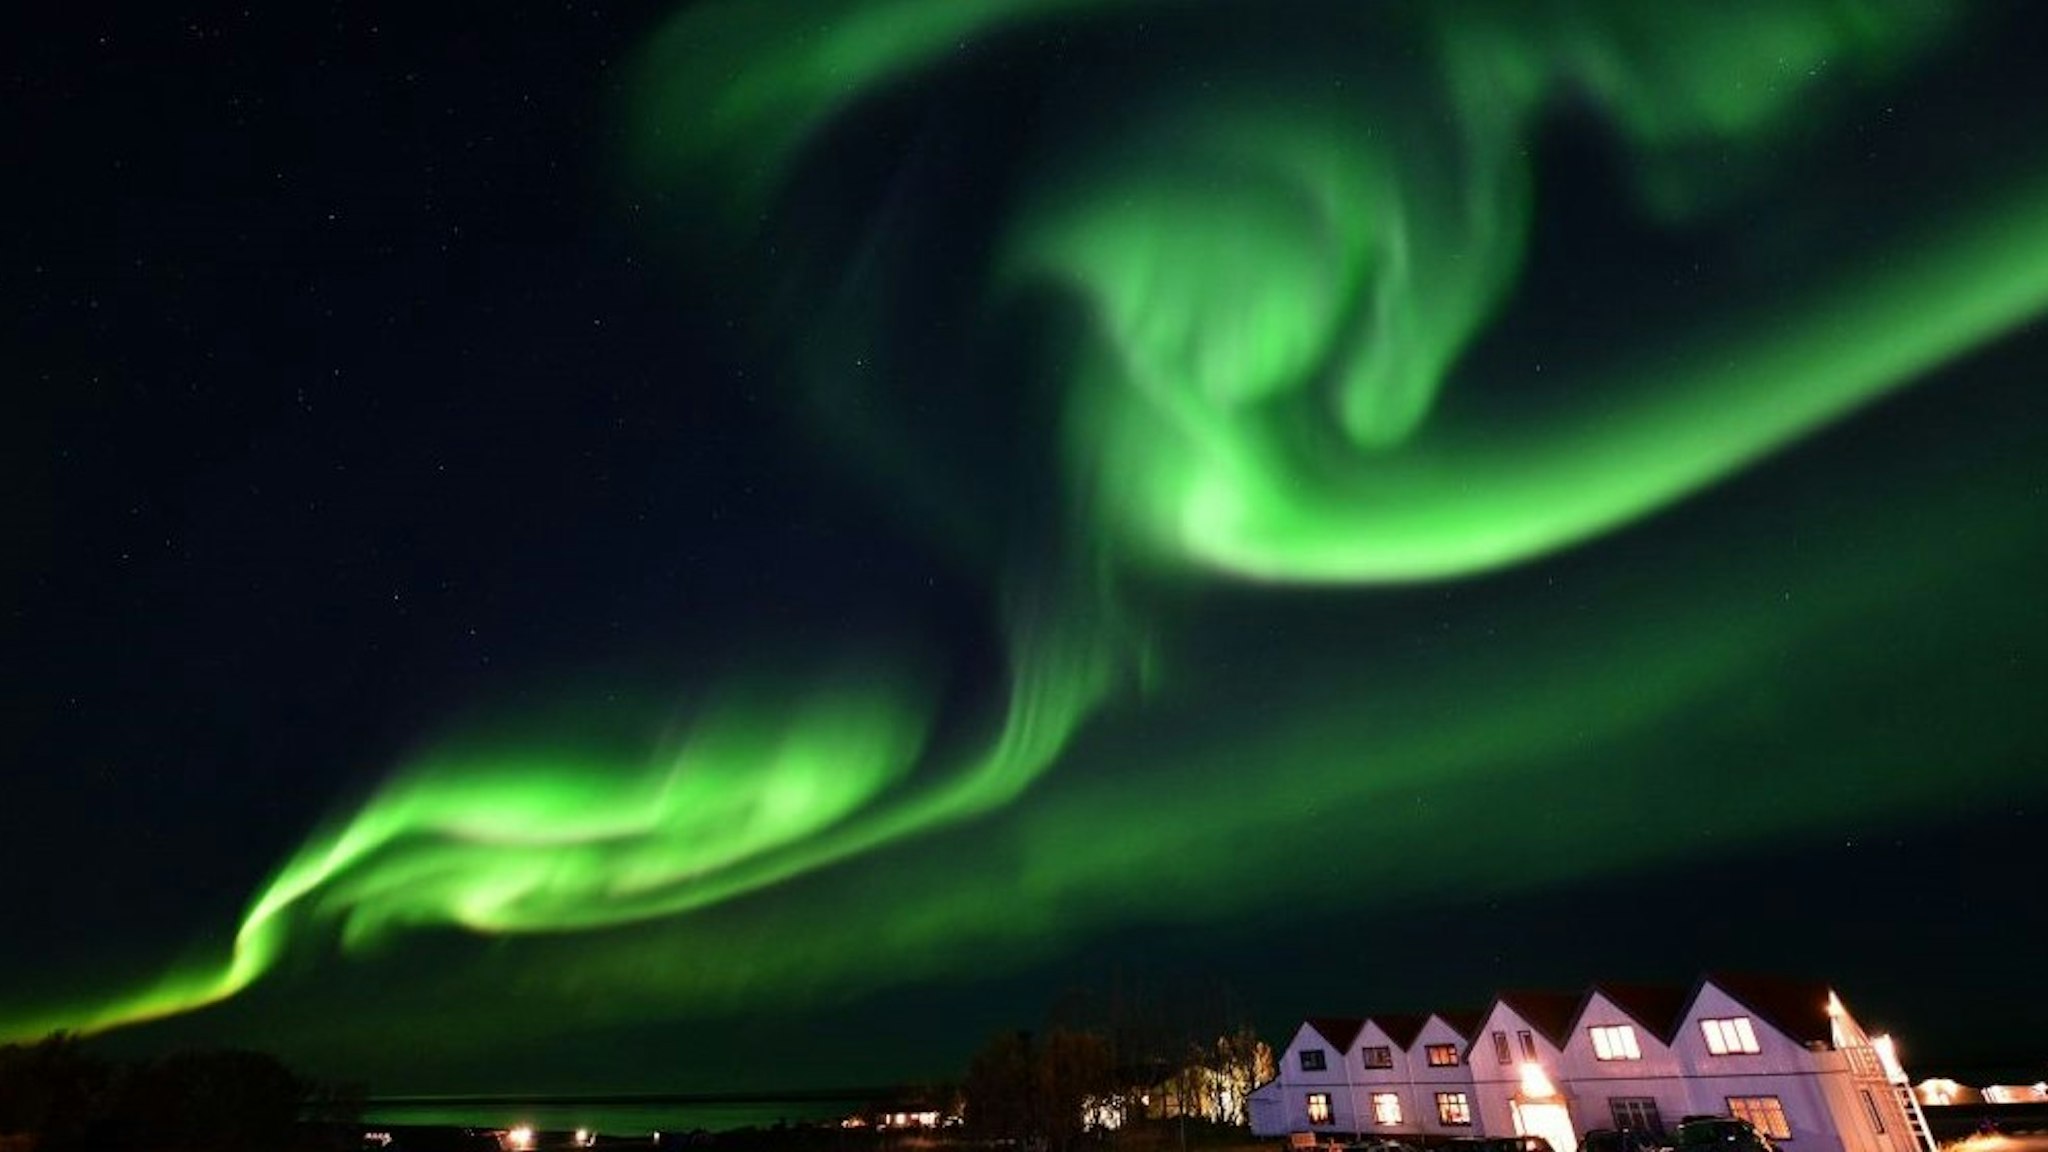 TOPSHOT - The aurora borealis, also known as northern lights, illuminates the sky along the Ring Road in southeastern Iceland, between Jokulsarlon glacier lagoon and Hofn, on October 7, 2018. (Photo by Mariana SUAREZ / AFP) (Photo by